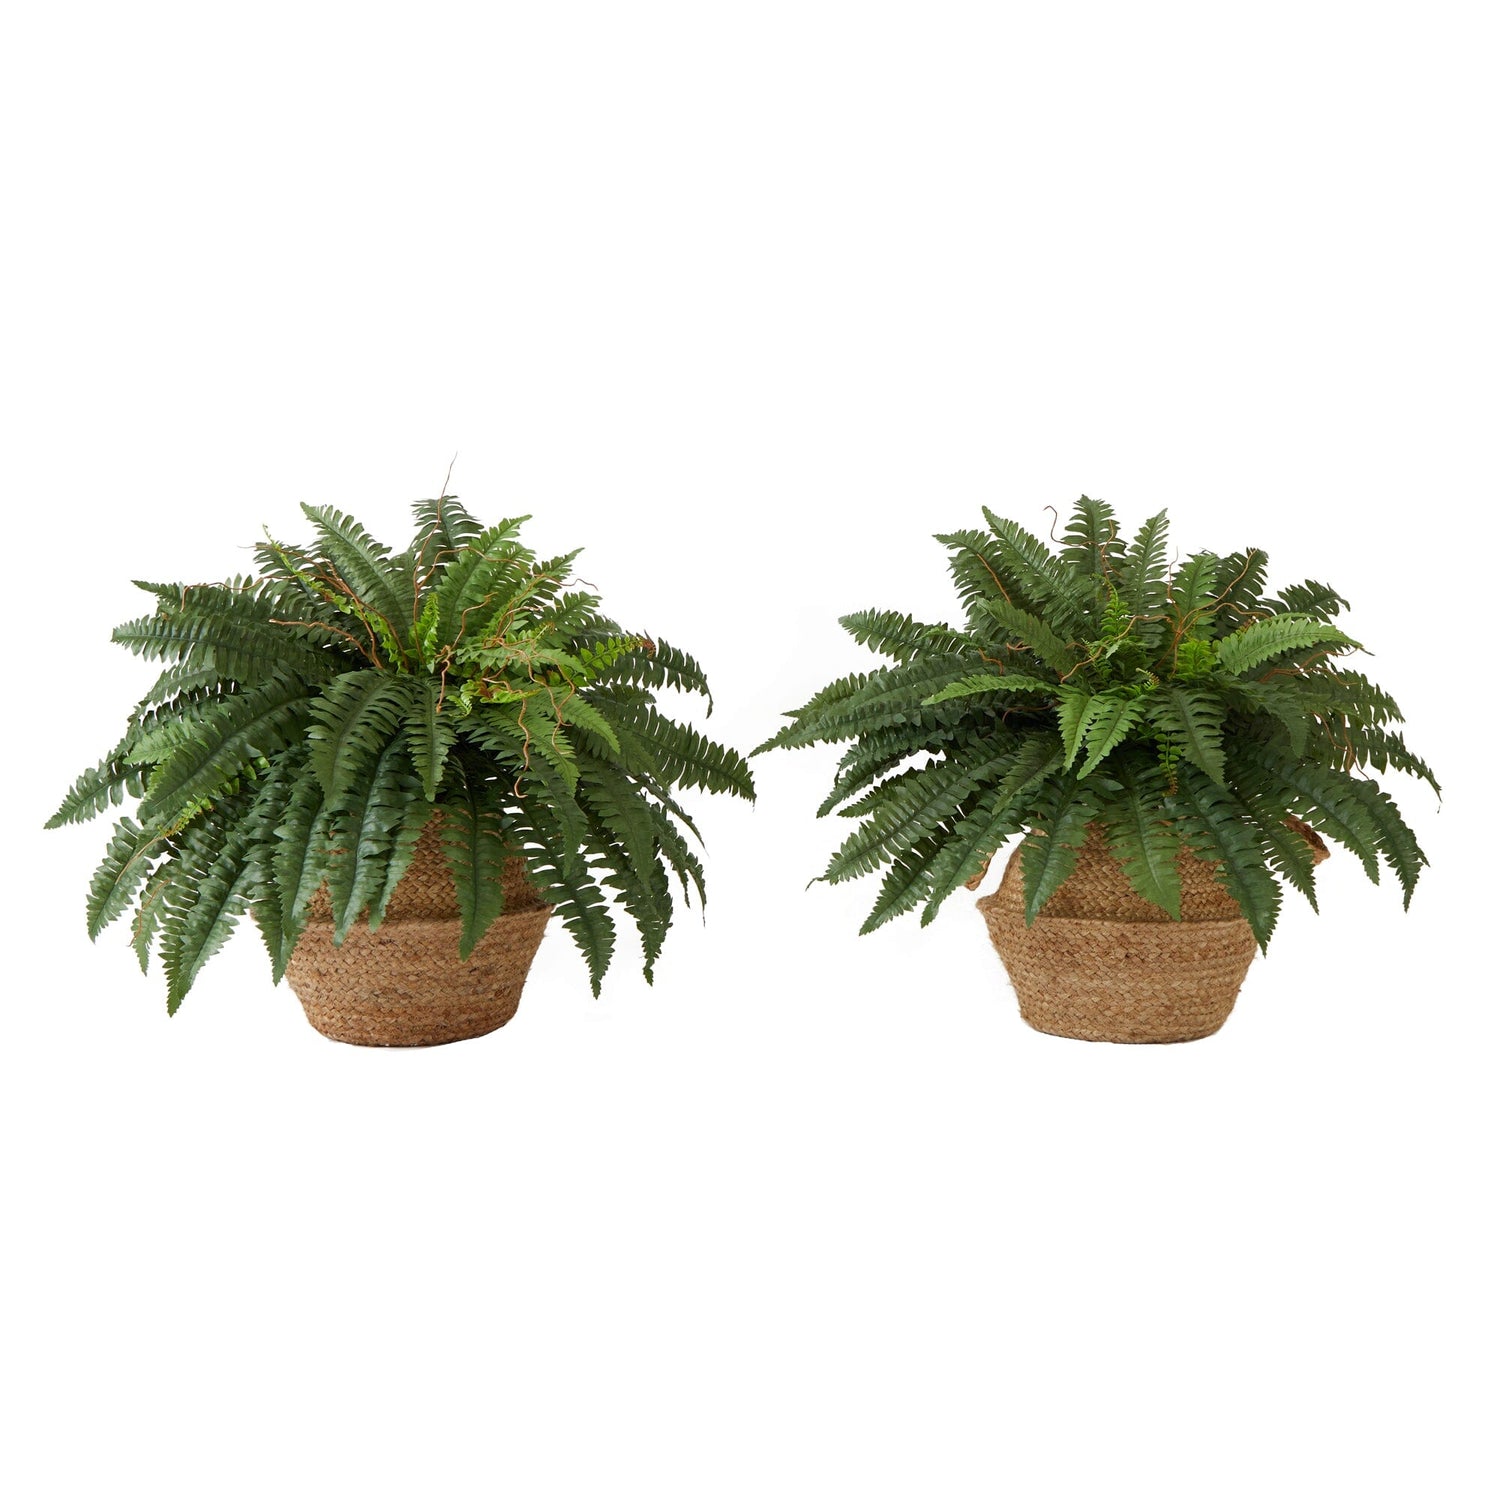 23” Artificial Boston Fern Plant with Handmade Jute & Cotton Basket with Handles DIY KIT - Set of 2